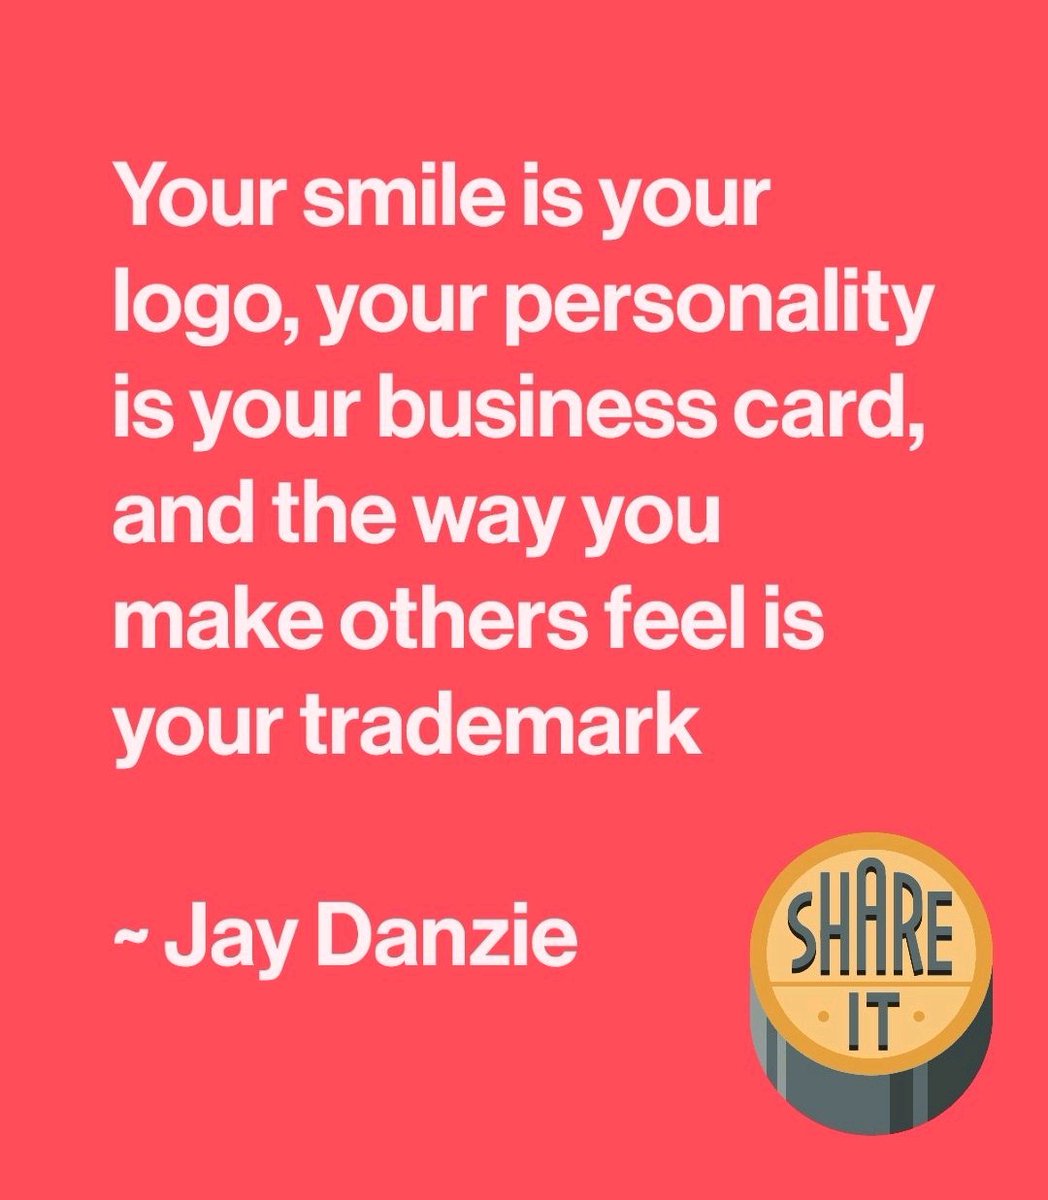 #quoteoftheday #Entrepreneurship

✅️ Consistent in one's thought, word and deed:)

#smile #personality #personalbranding #behaviour #humble #friendly #helpful #kind #peopleskills #hr #entrepreneurship